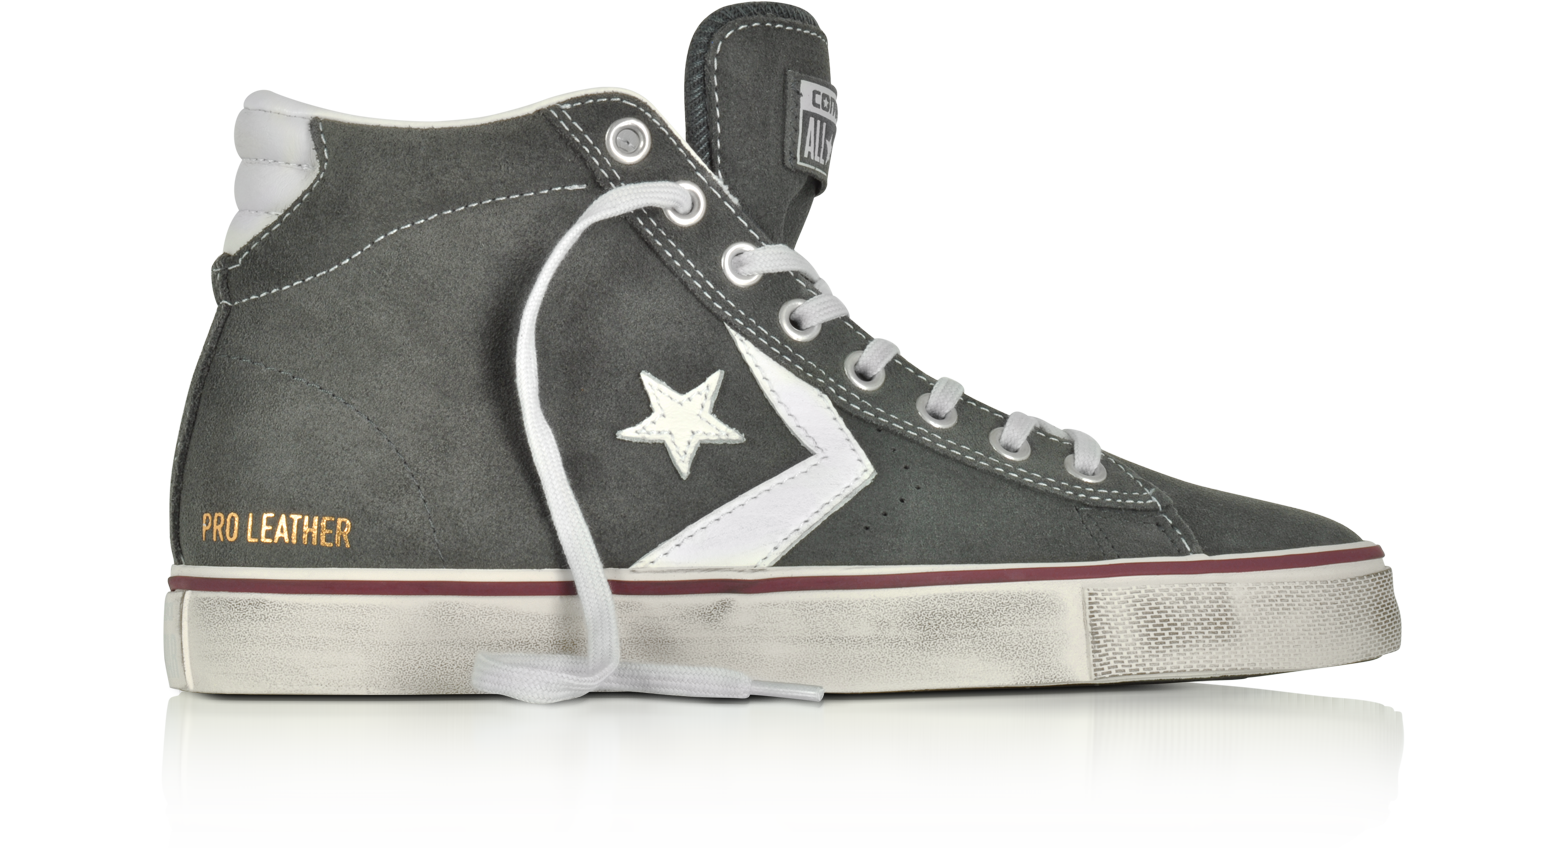 converse pro leather limited edition